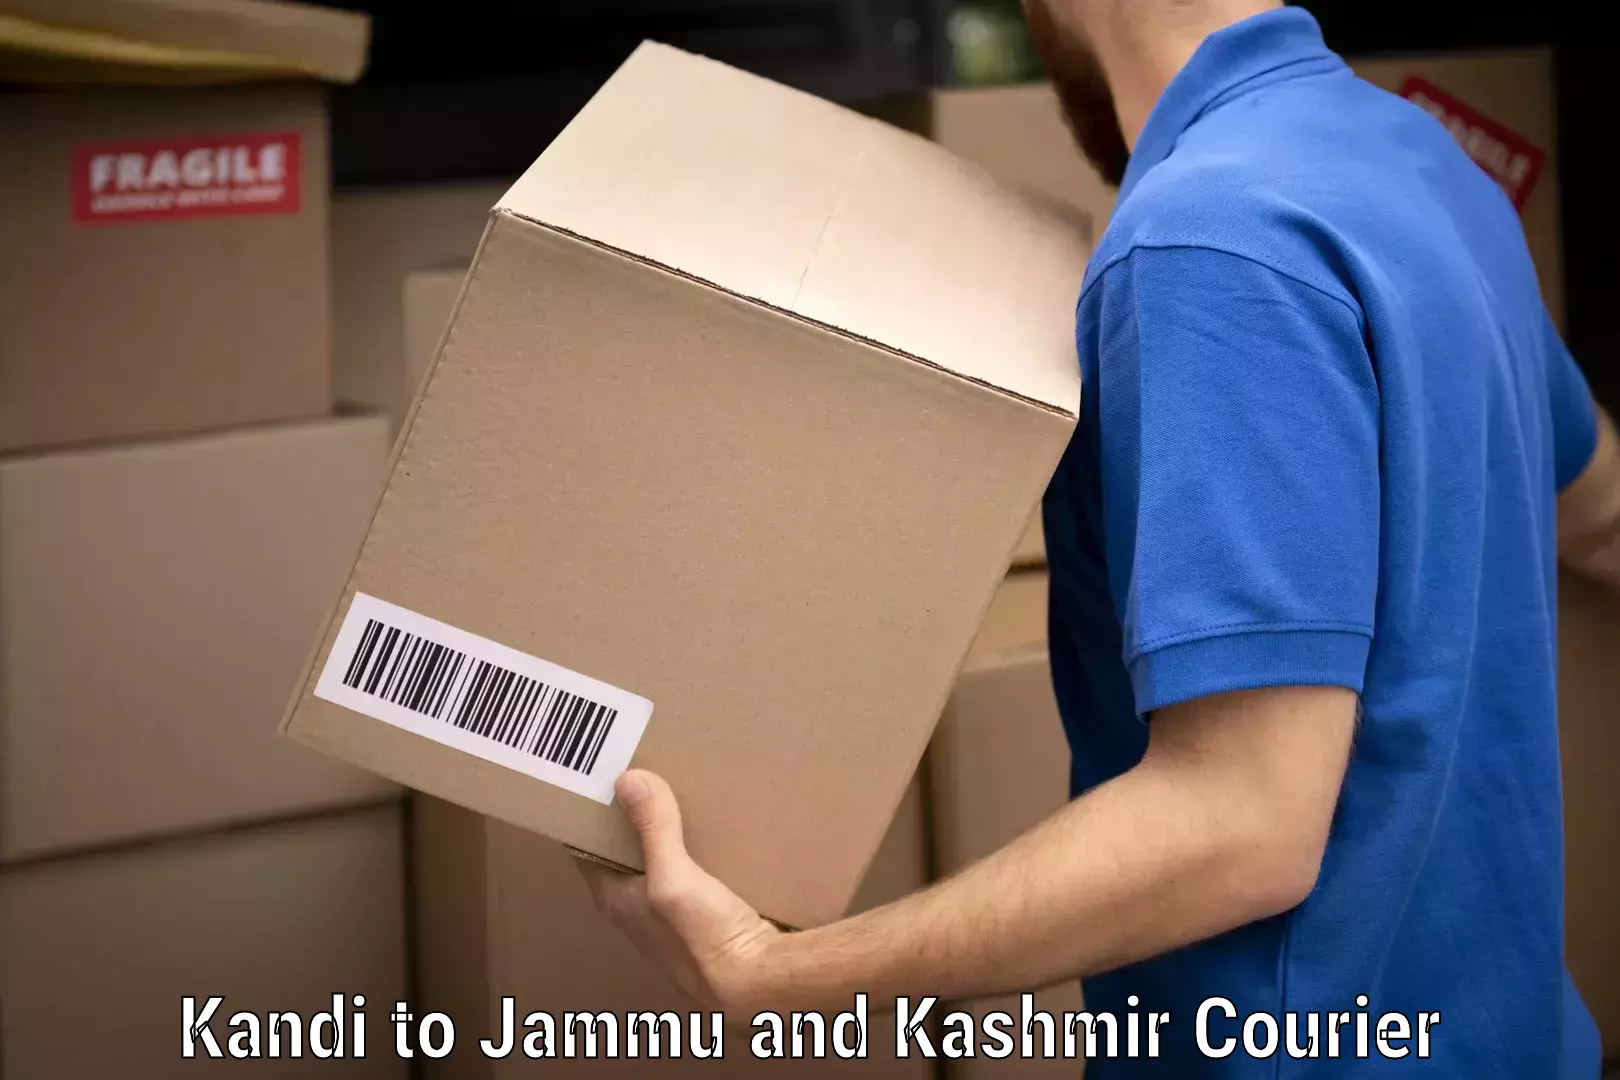 Home relocation experts Kandi to Jammu and Kashmir